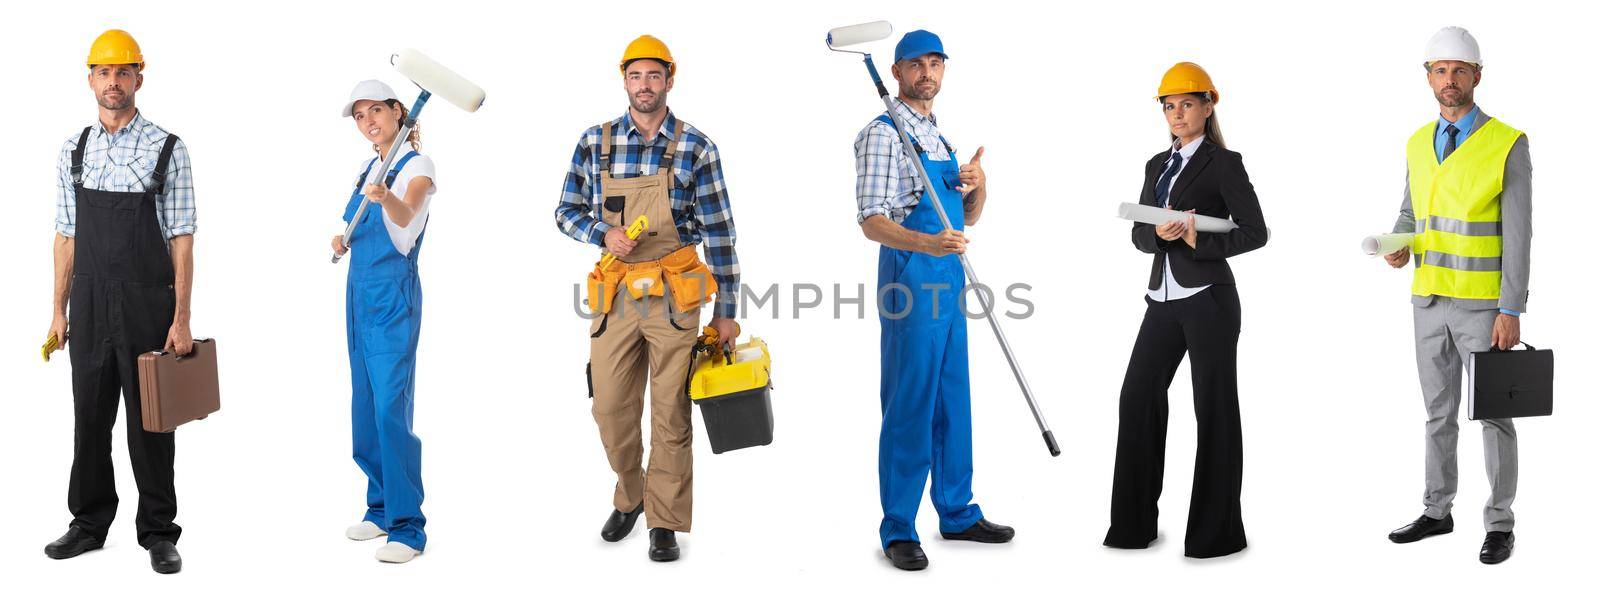 Set of professional workers people by ALotOfPeople